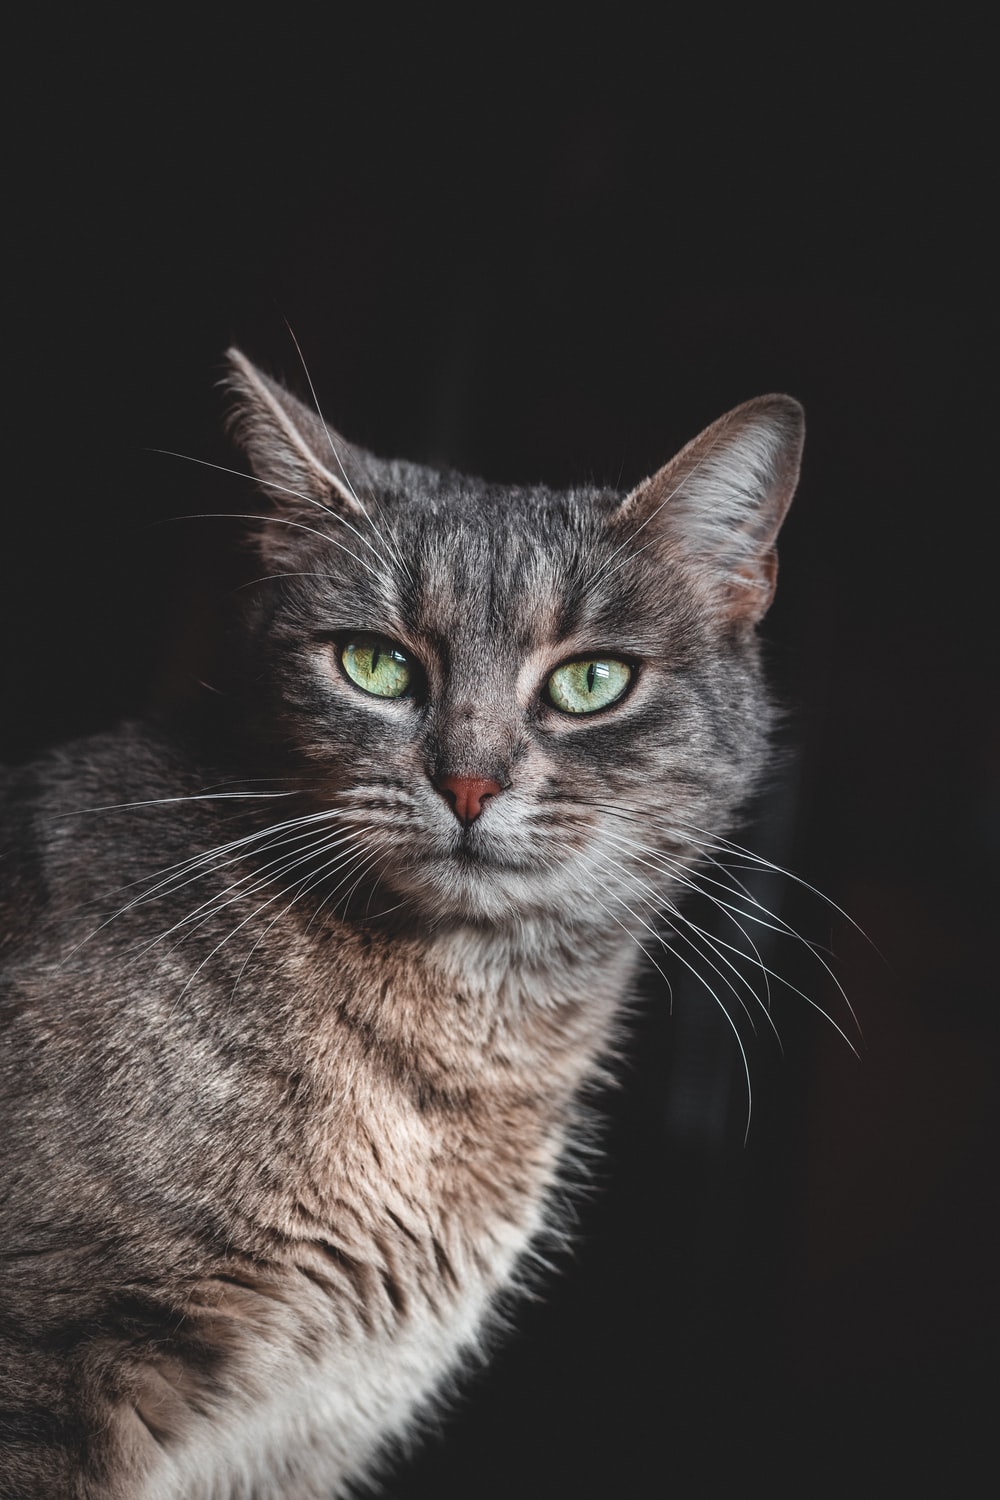 1K+ Grey Cat Picture. Download Free Image